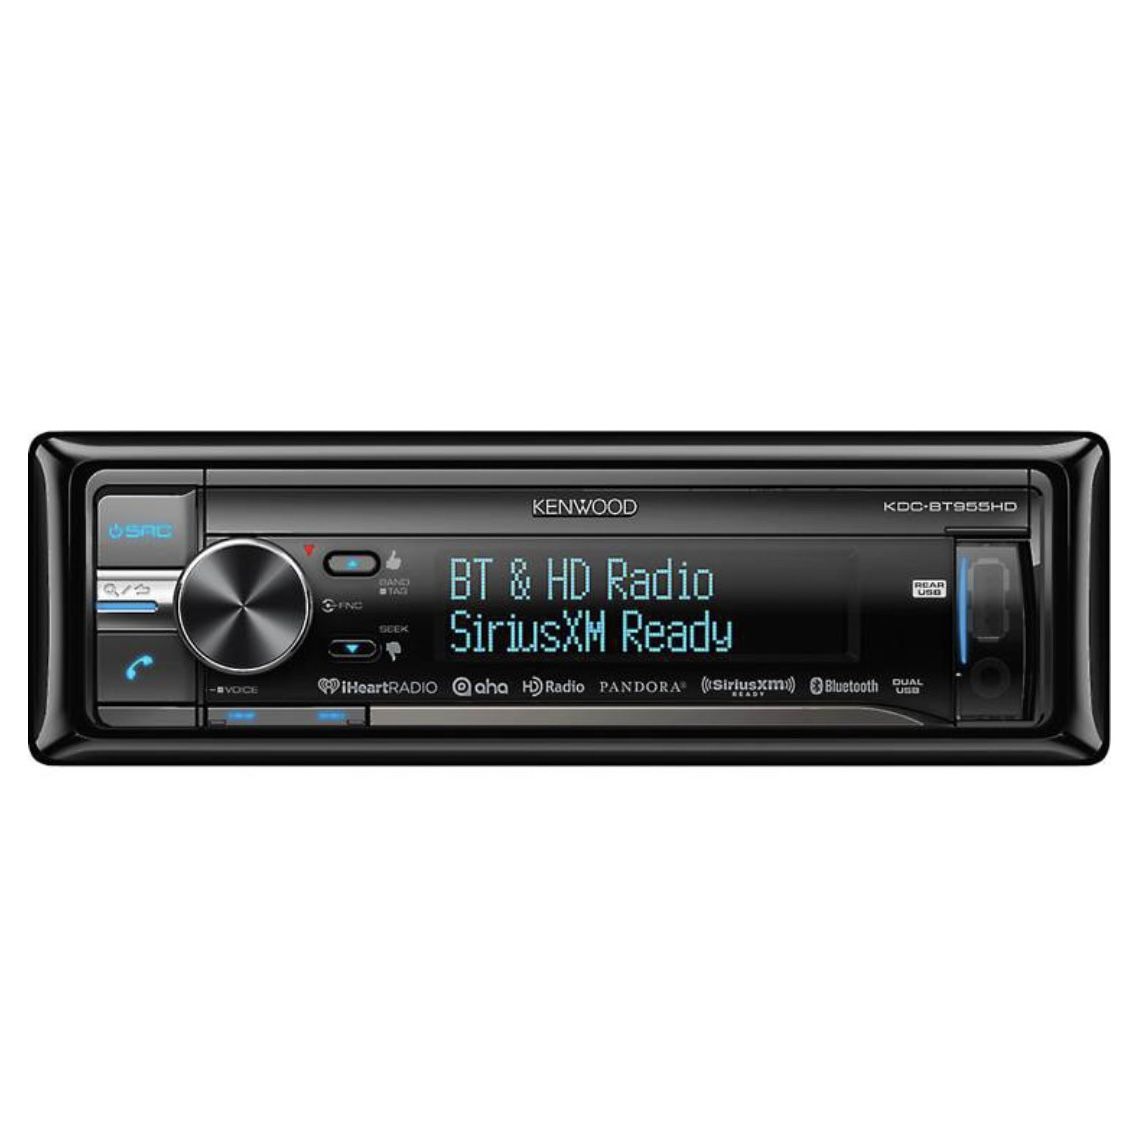 Kenwood KDC-BT955HD Bluetooth Car Radio CD Receiver Comes With Cables